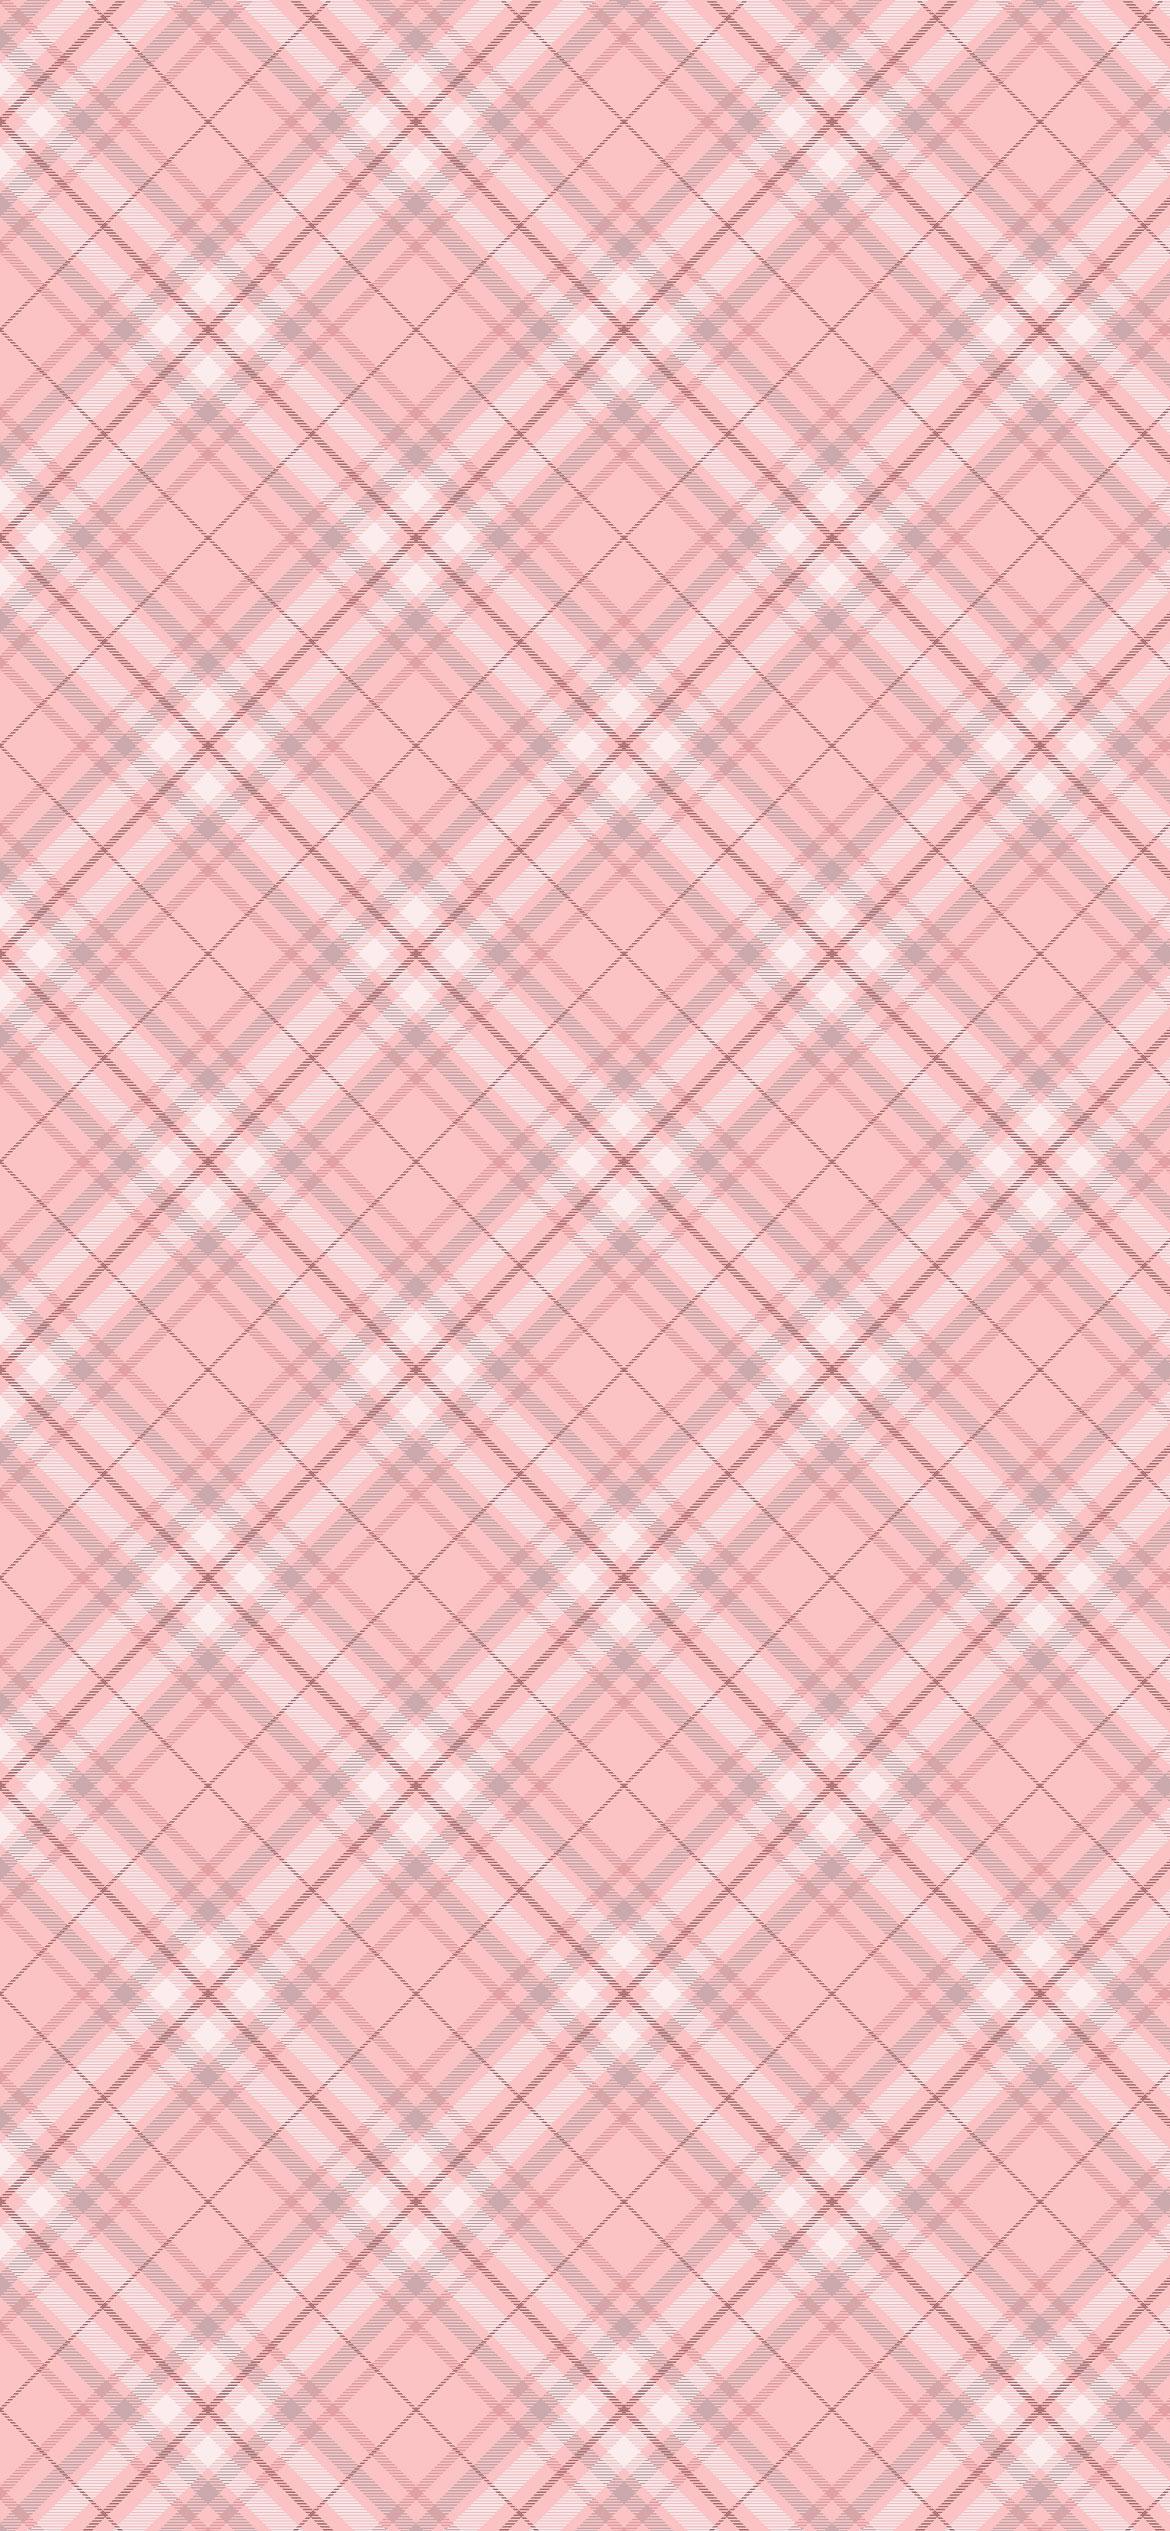 Pink Aesthetic Pictures Burberry Plaid Wallpaper Idea